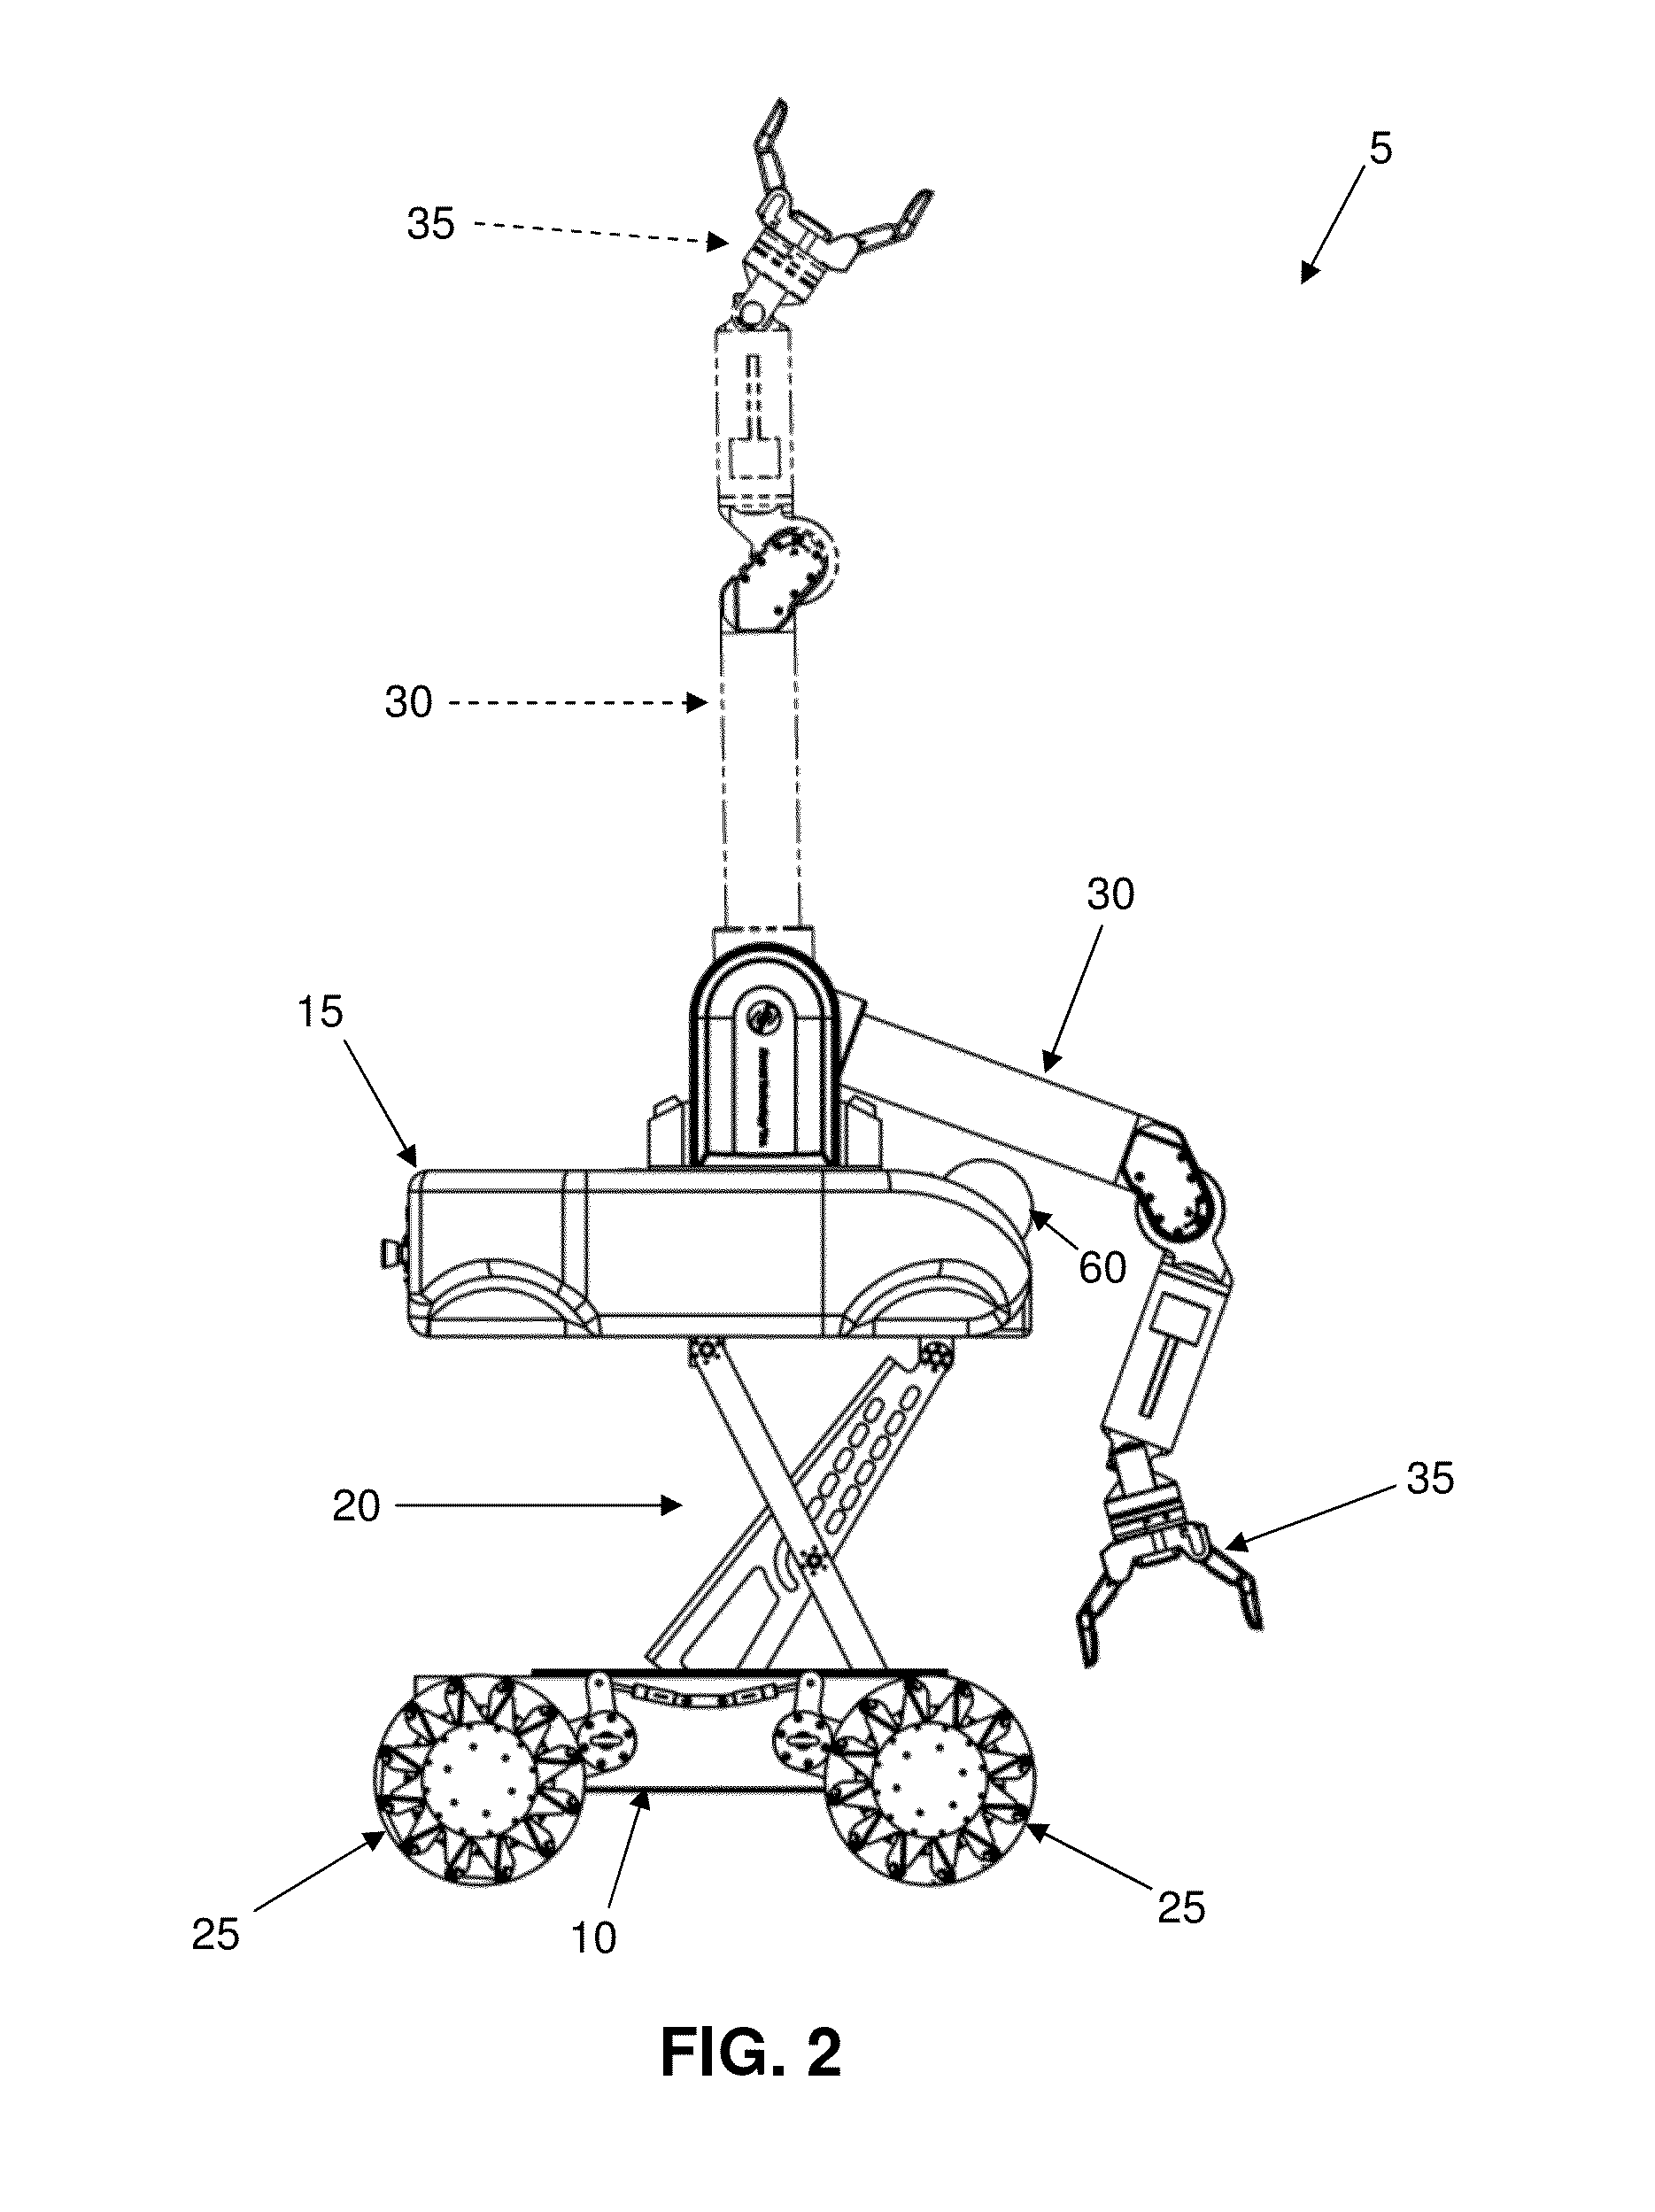 Mobile manipulation system with vertical lift